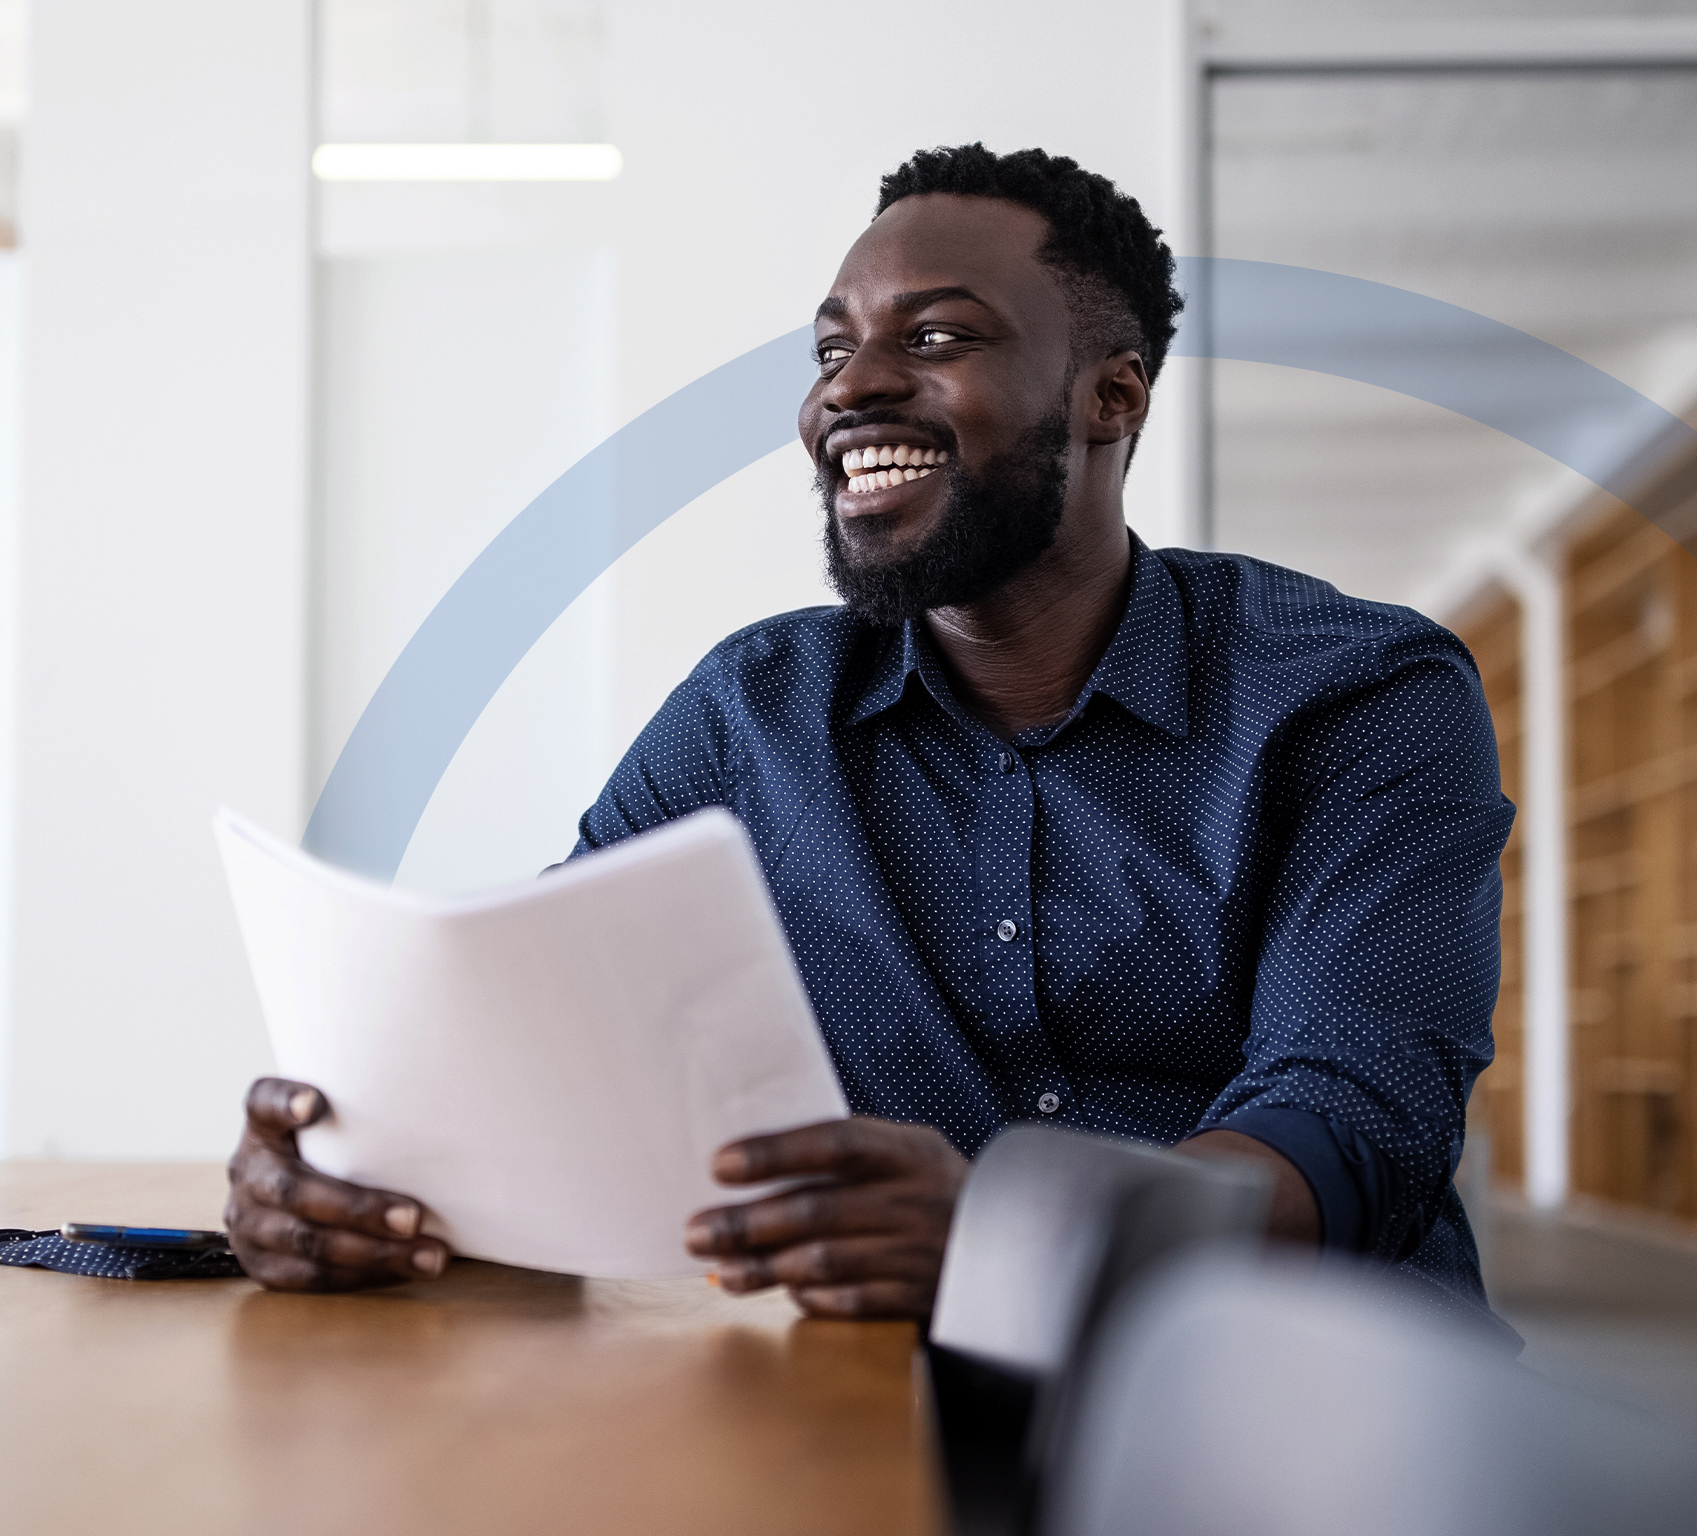 Man sitting at desk smiling with papers